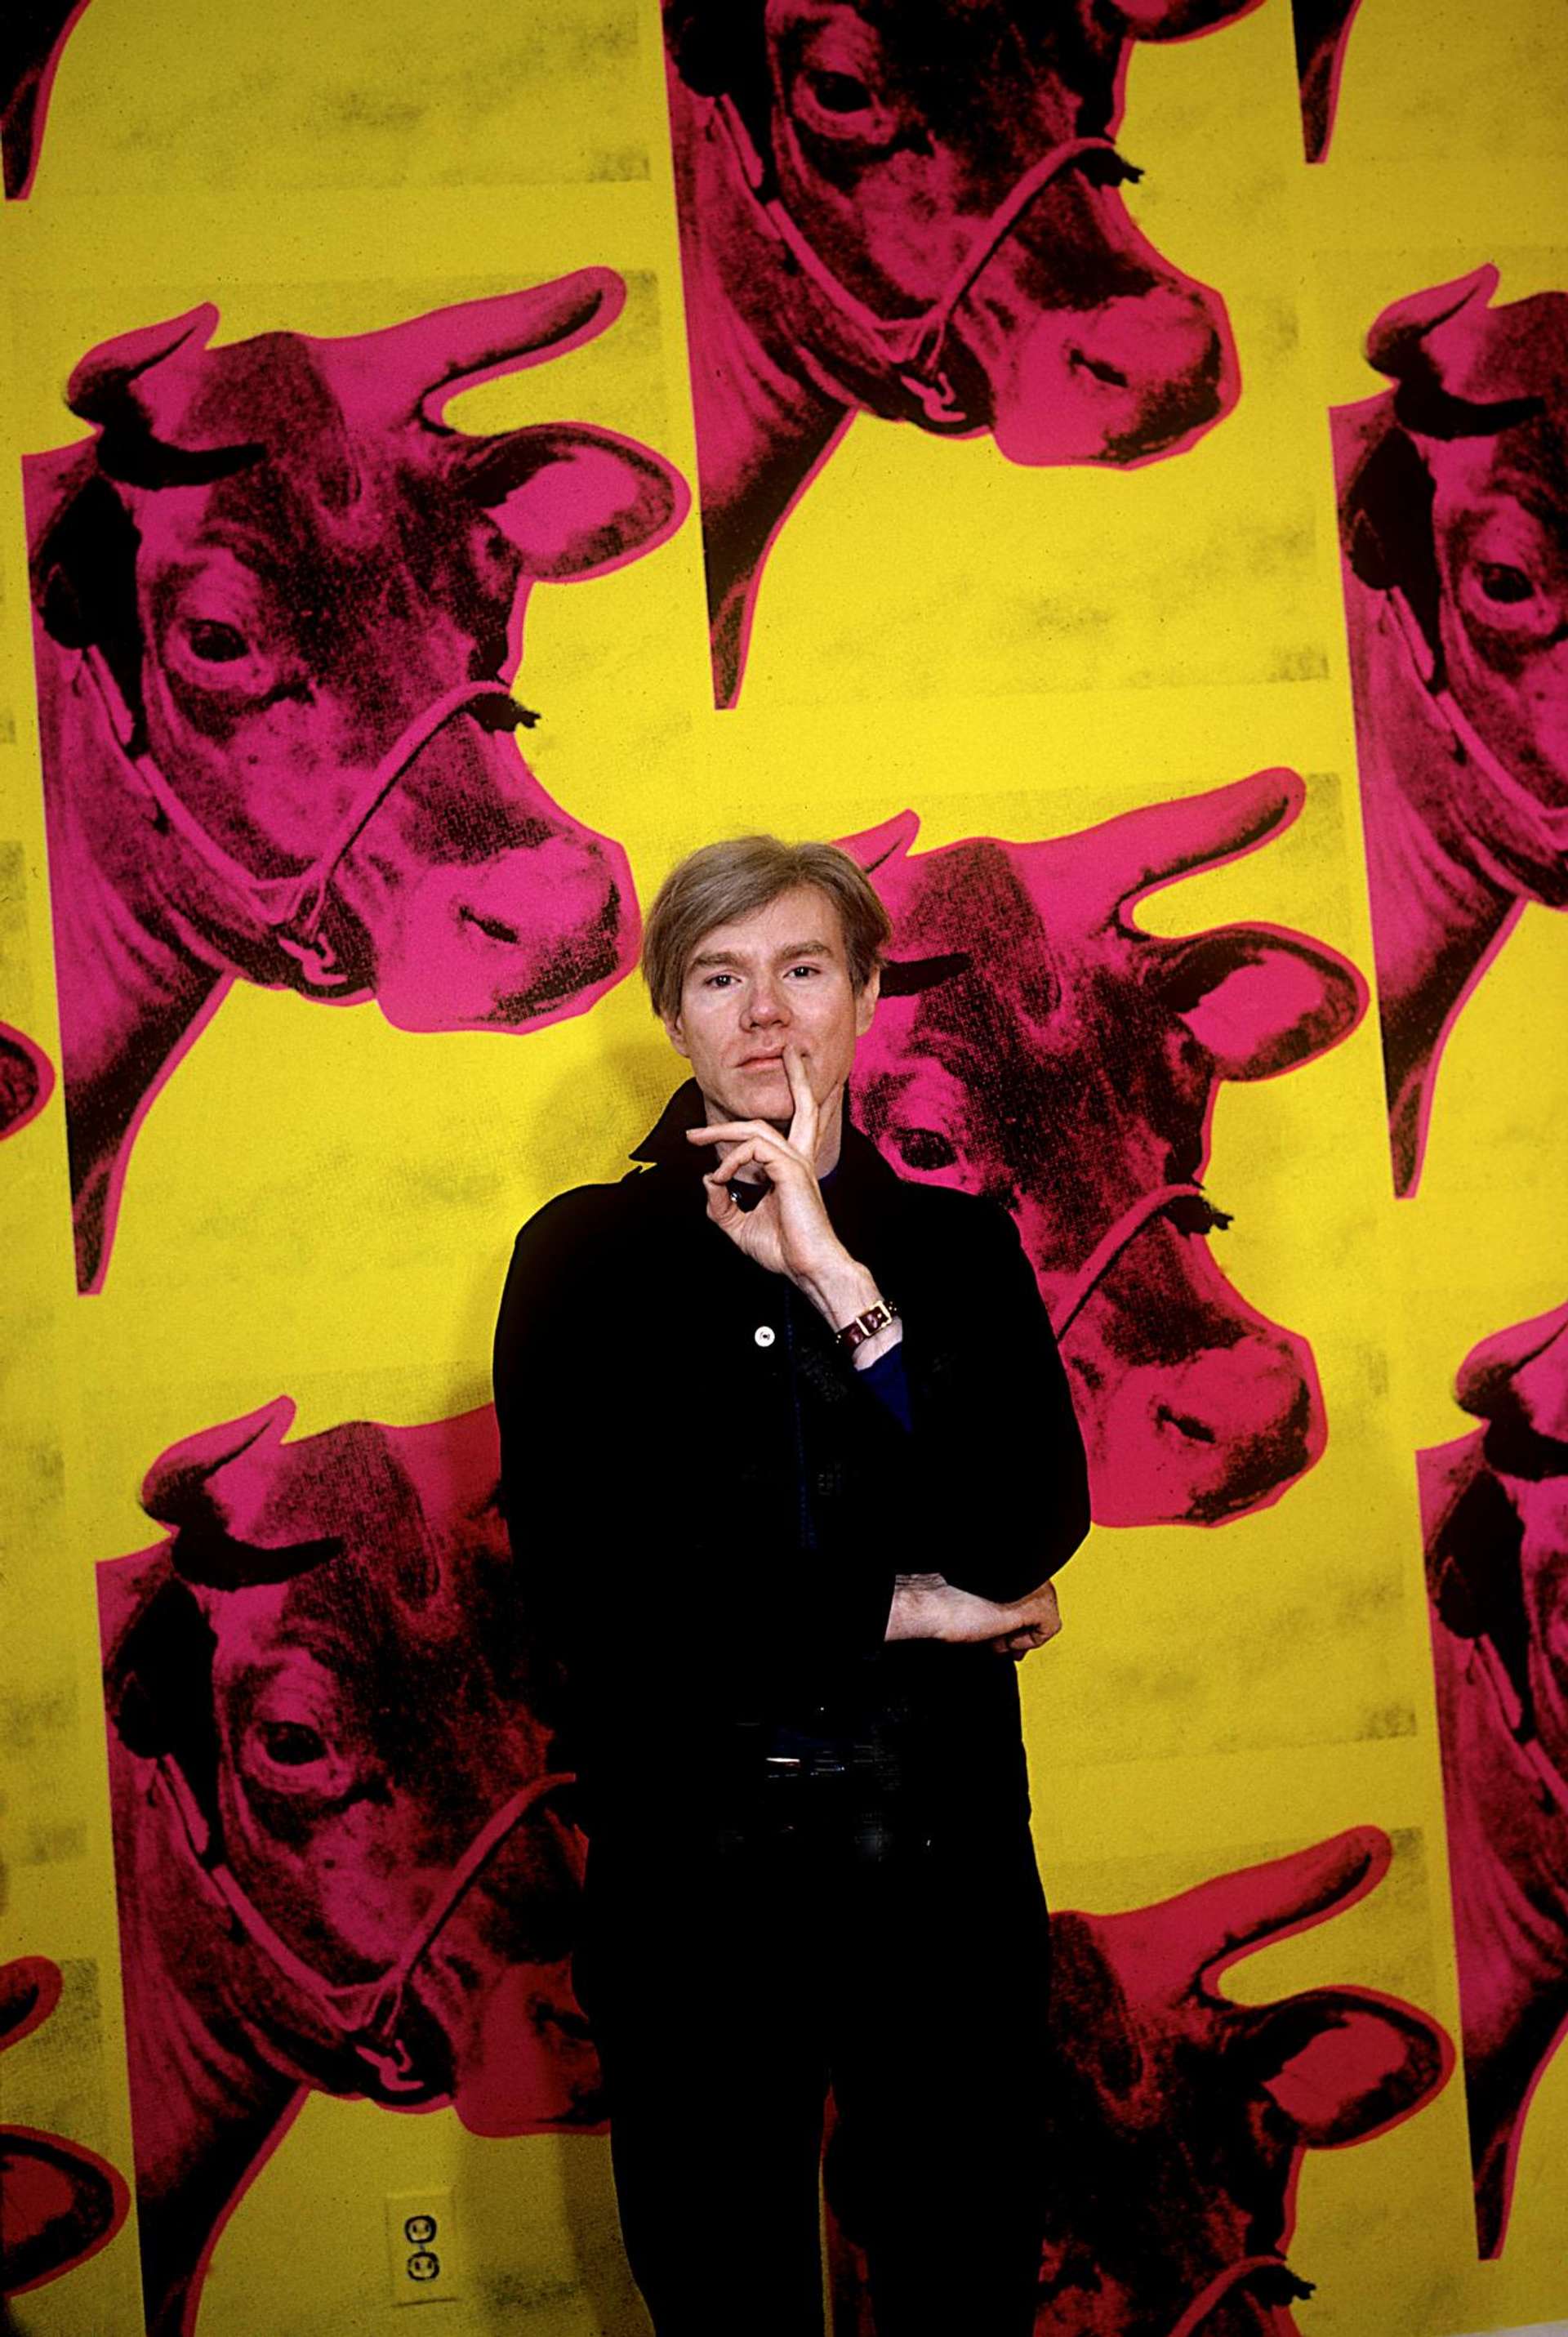 Andy Warhol With Cow by Steve Schapiro